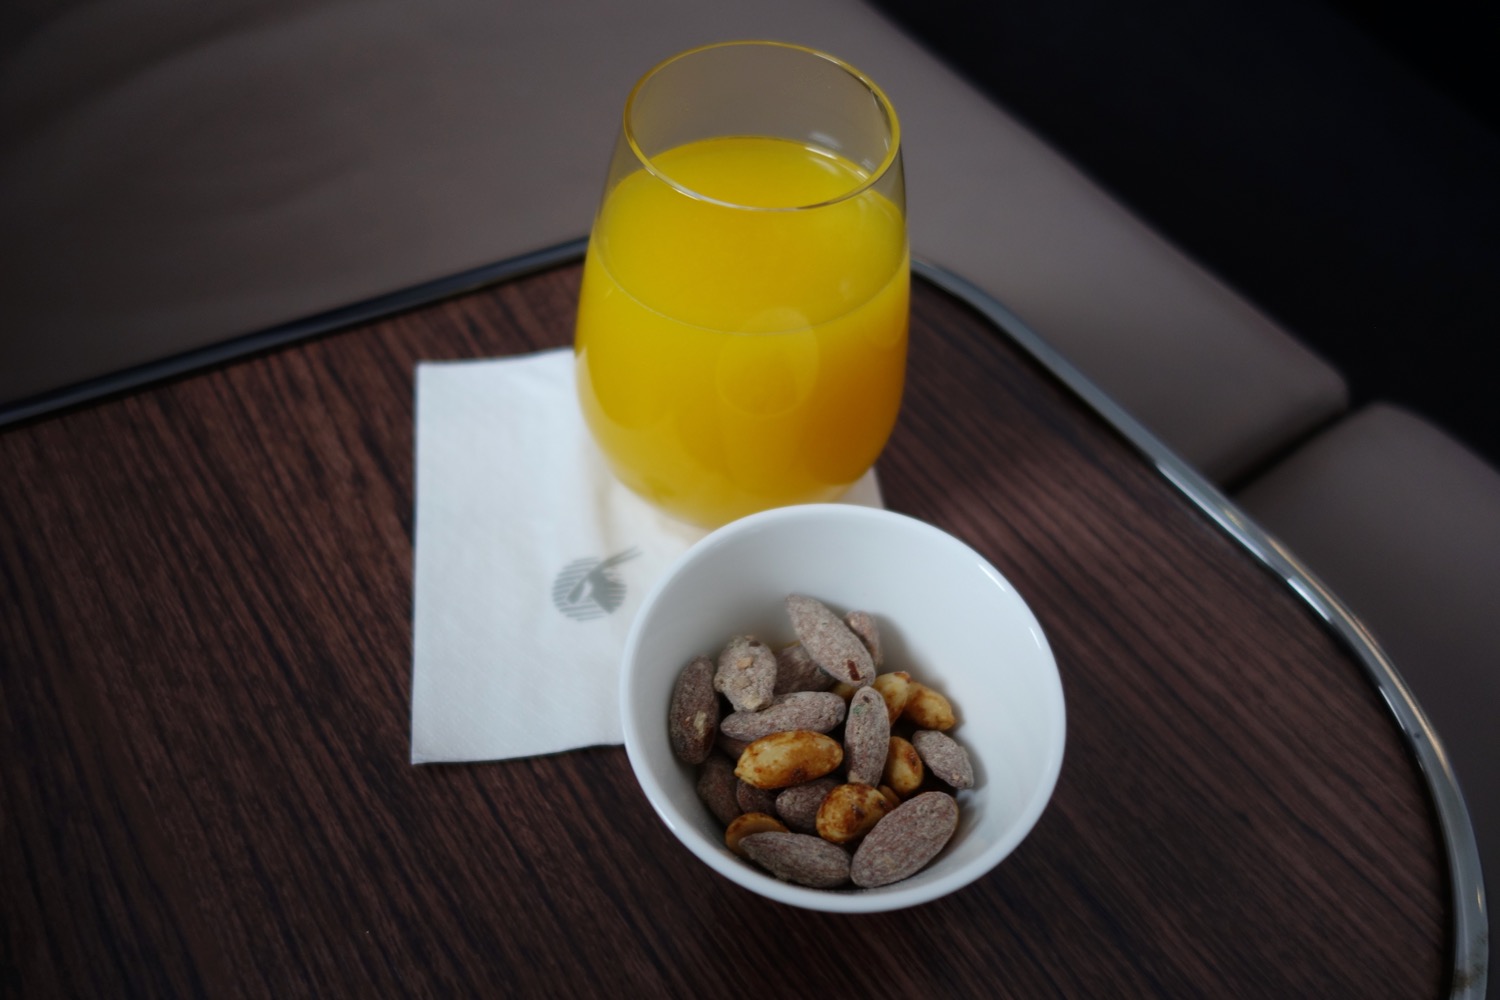 a bowl of nuts and a glass of orange juice